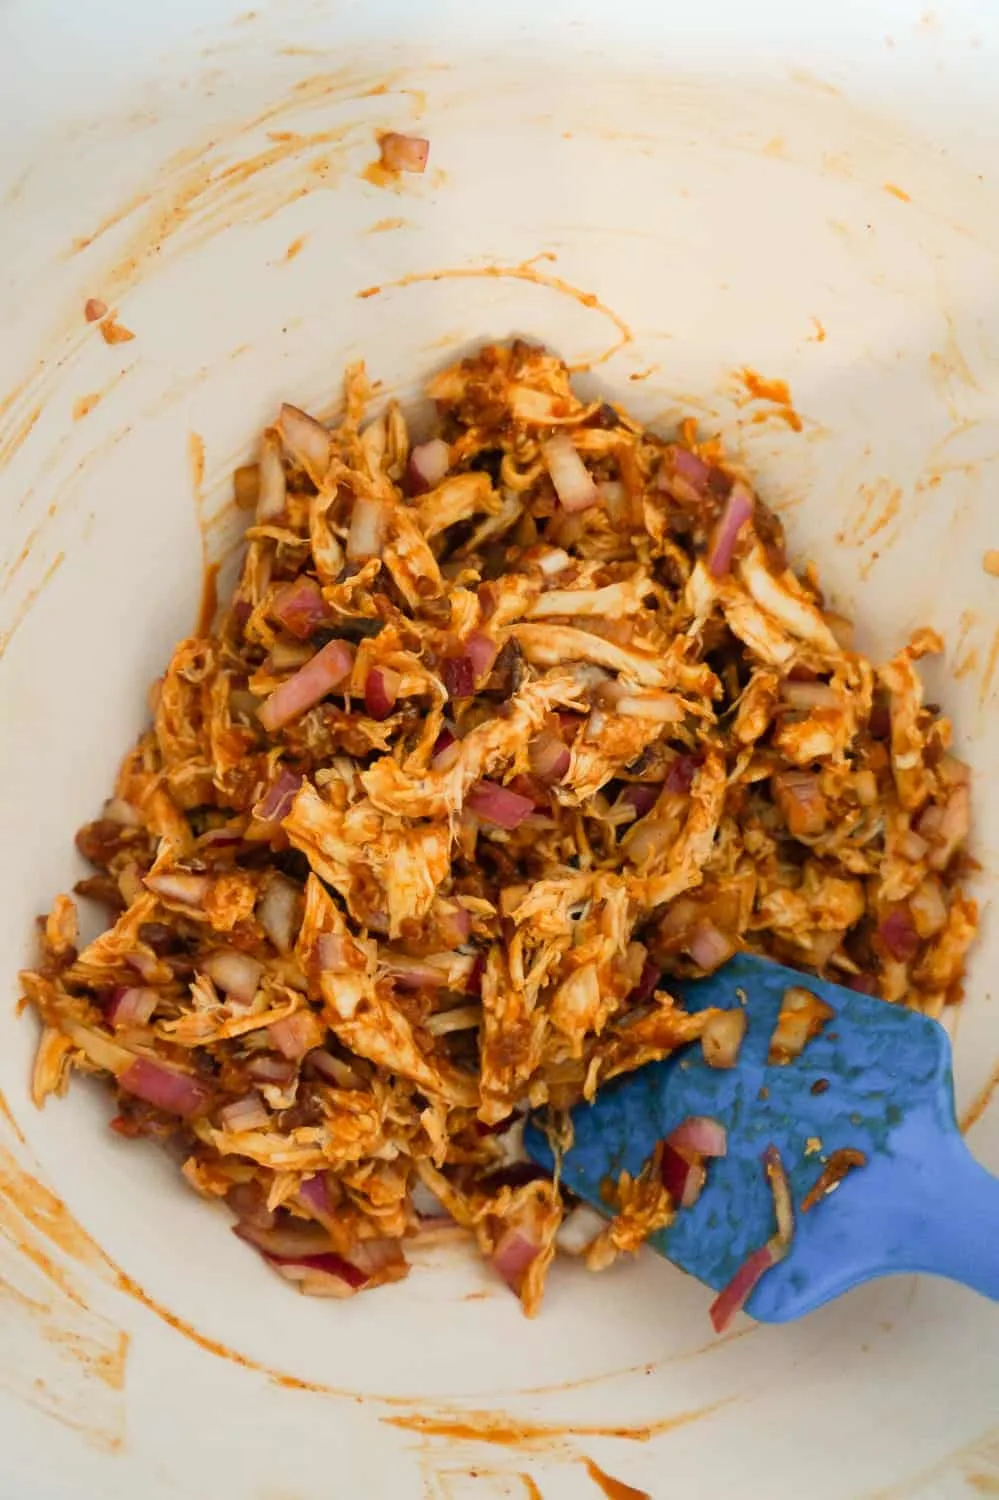 shredded chicken and BBQ sauce mixture in a mixing bowl